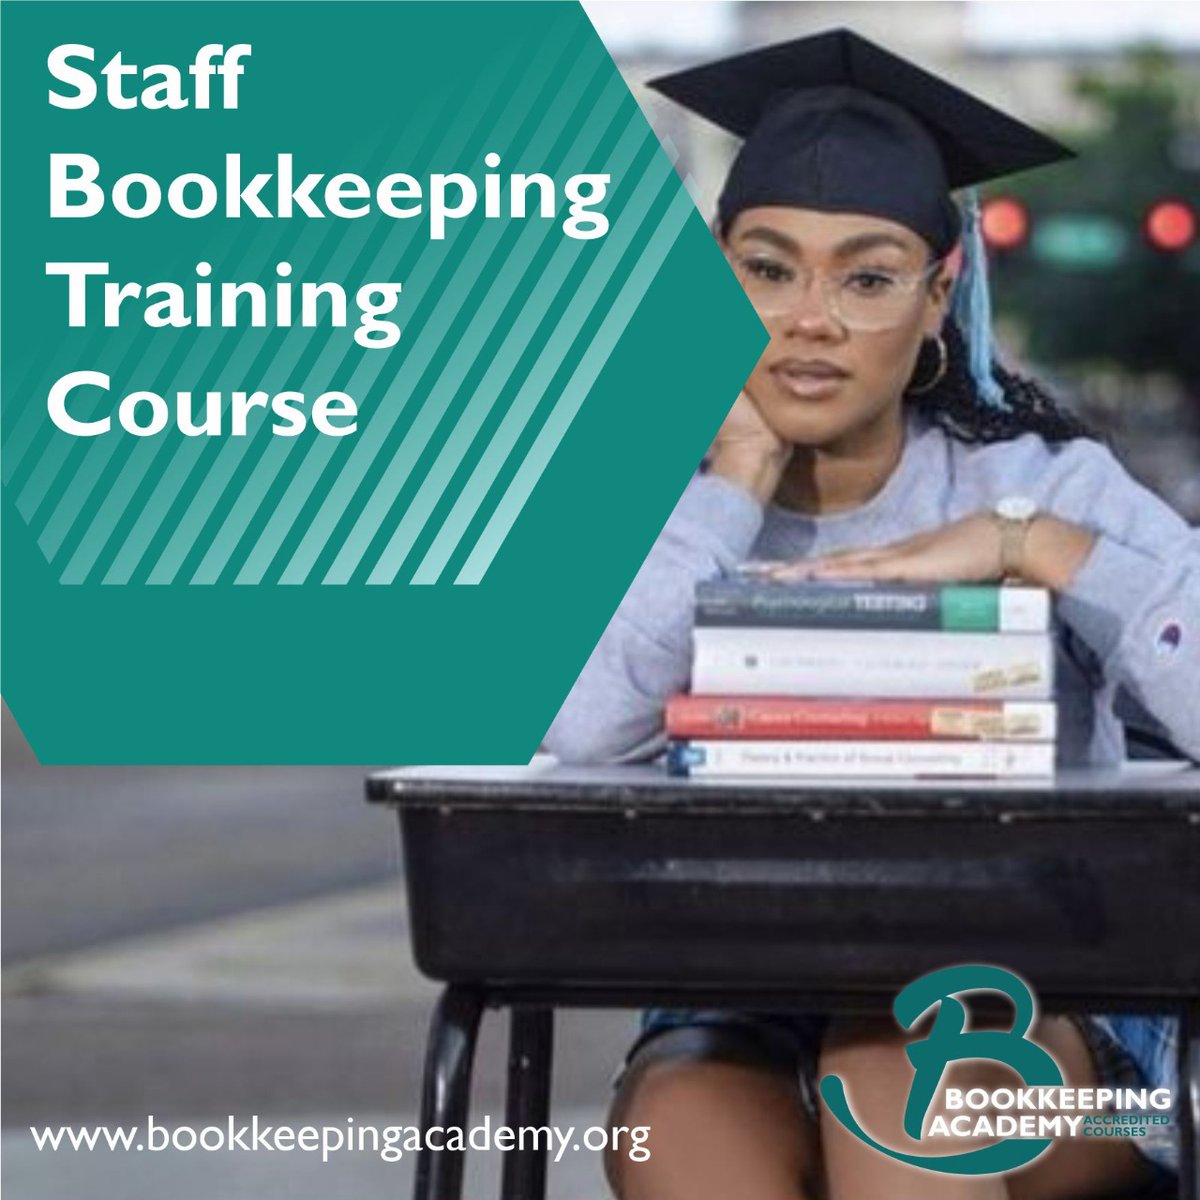 #AD 🟧BOOKKEEPING ACADEMY🔸 🔗bookkeepingacademy.org ⬜ACCREDITED & NON ACCREDITED COURSES◽ 🟧FOR MORE INFORMATION 📧academy@bookkeeping.org OR 📲WHATSAPP 060 705 2488◽ ⬜InvestInYourFutureIn2024 🎓🎓🎓